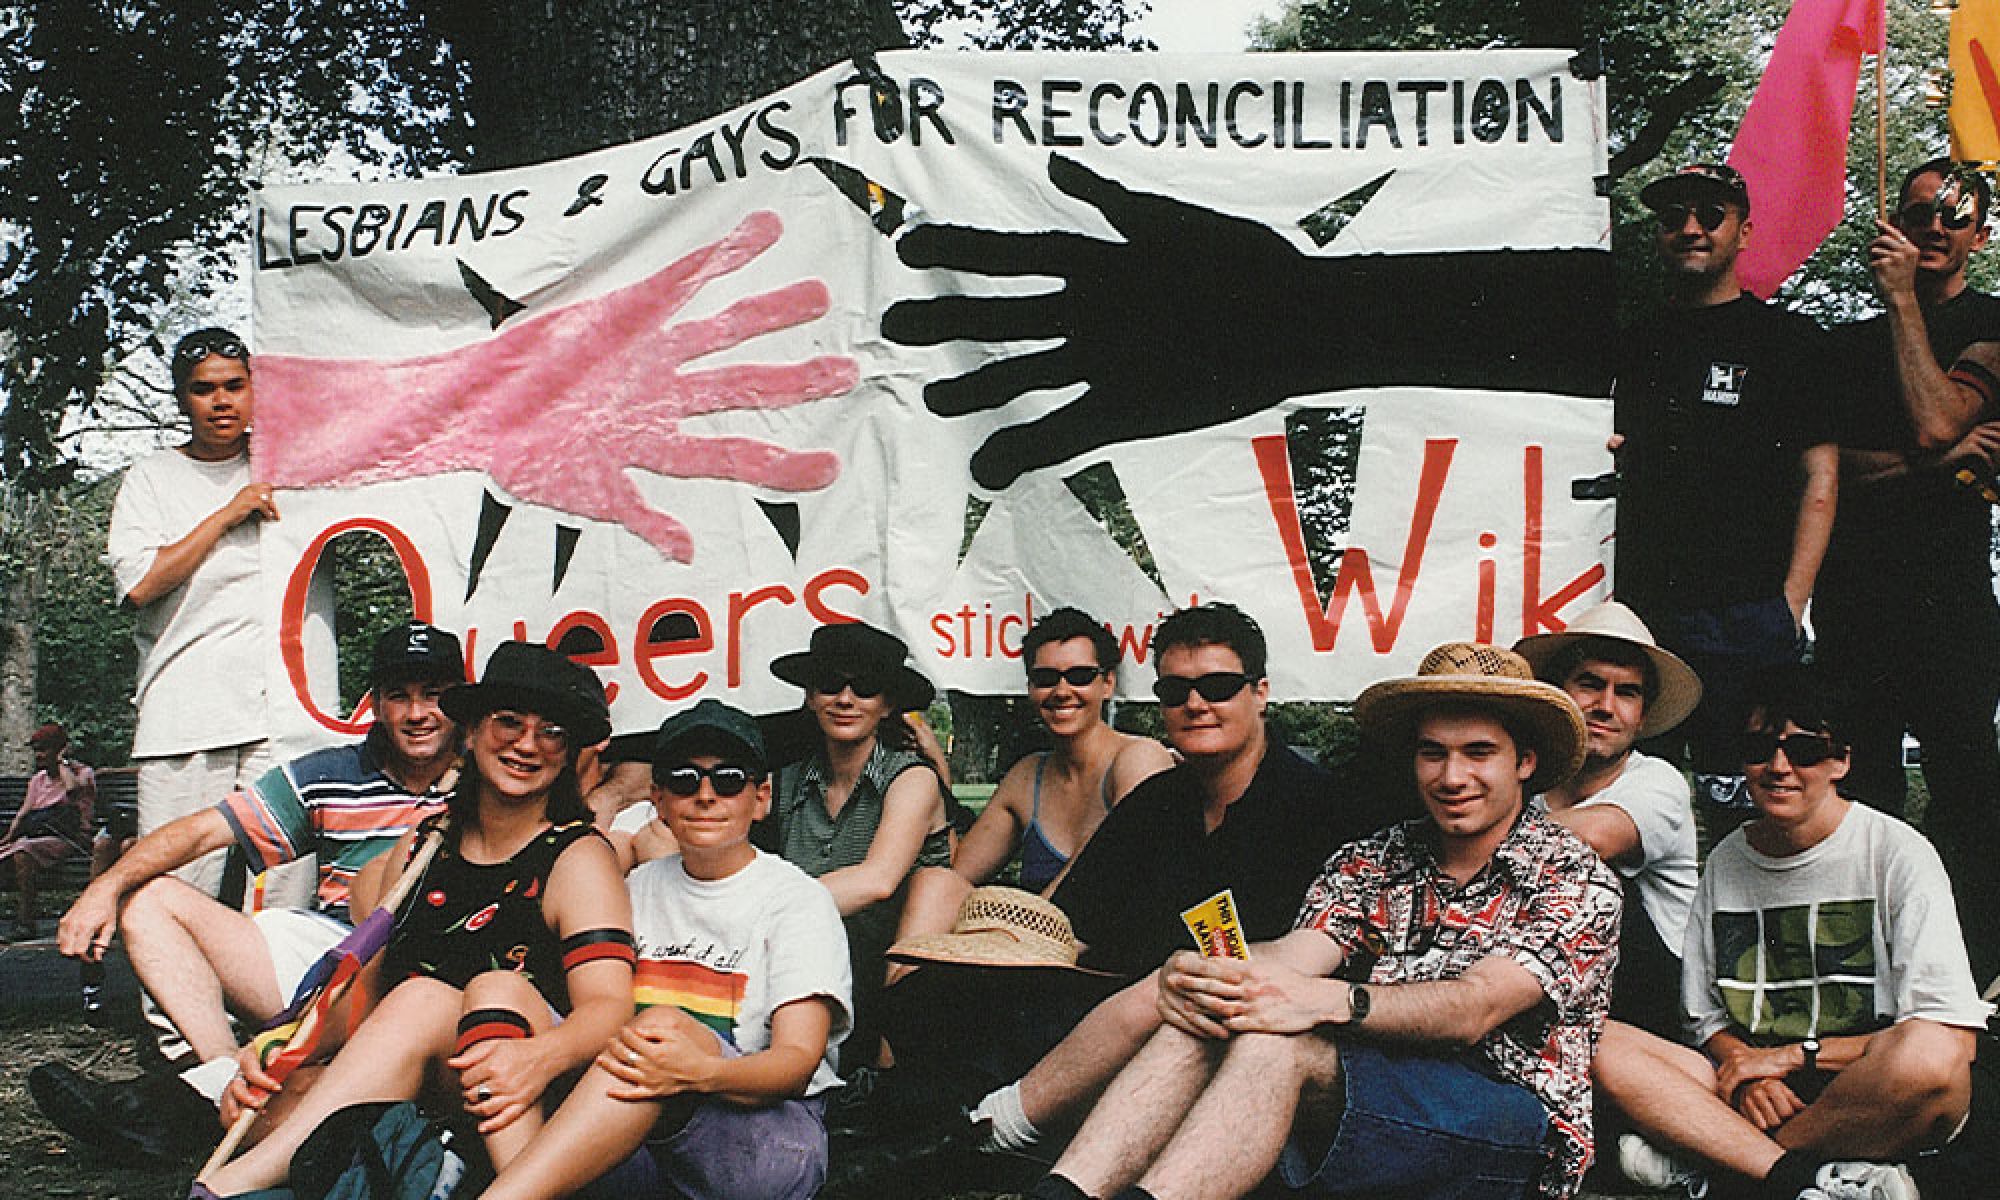 The image shows a group of people from the LGBTQI+ community holding up a flag that reads ' Lesbians and Gays for Reconciliation'.